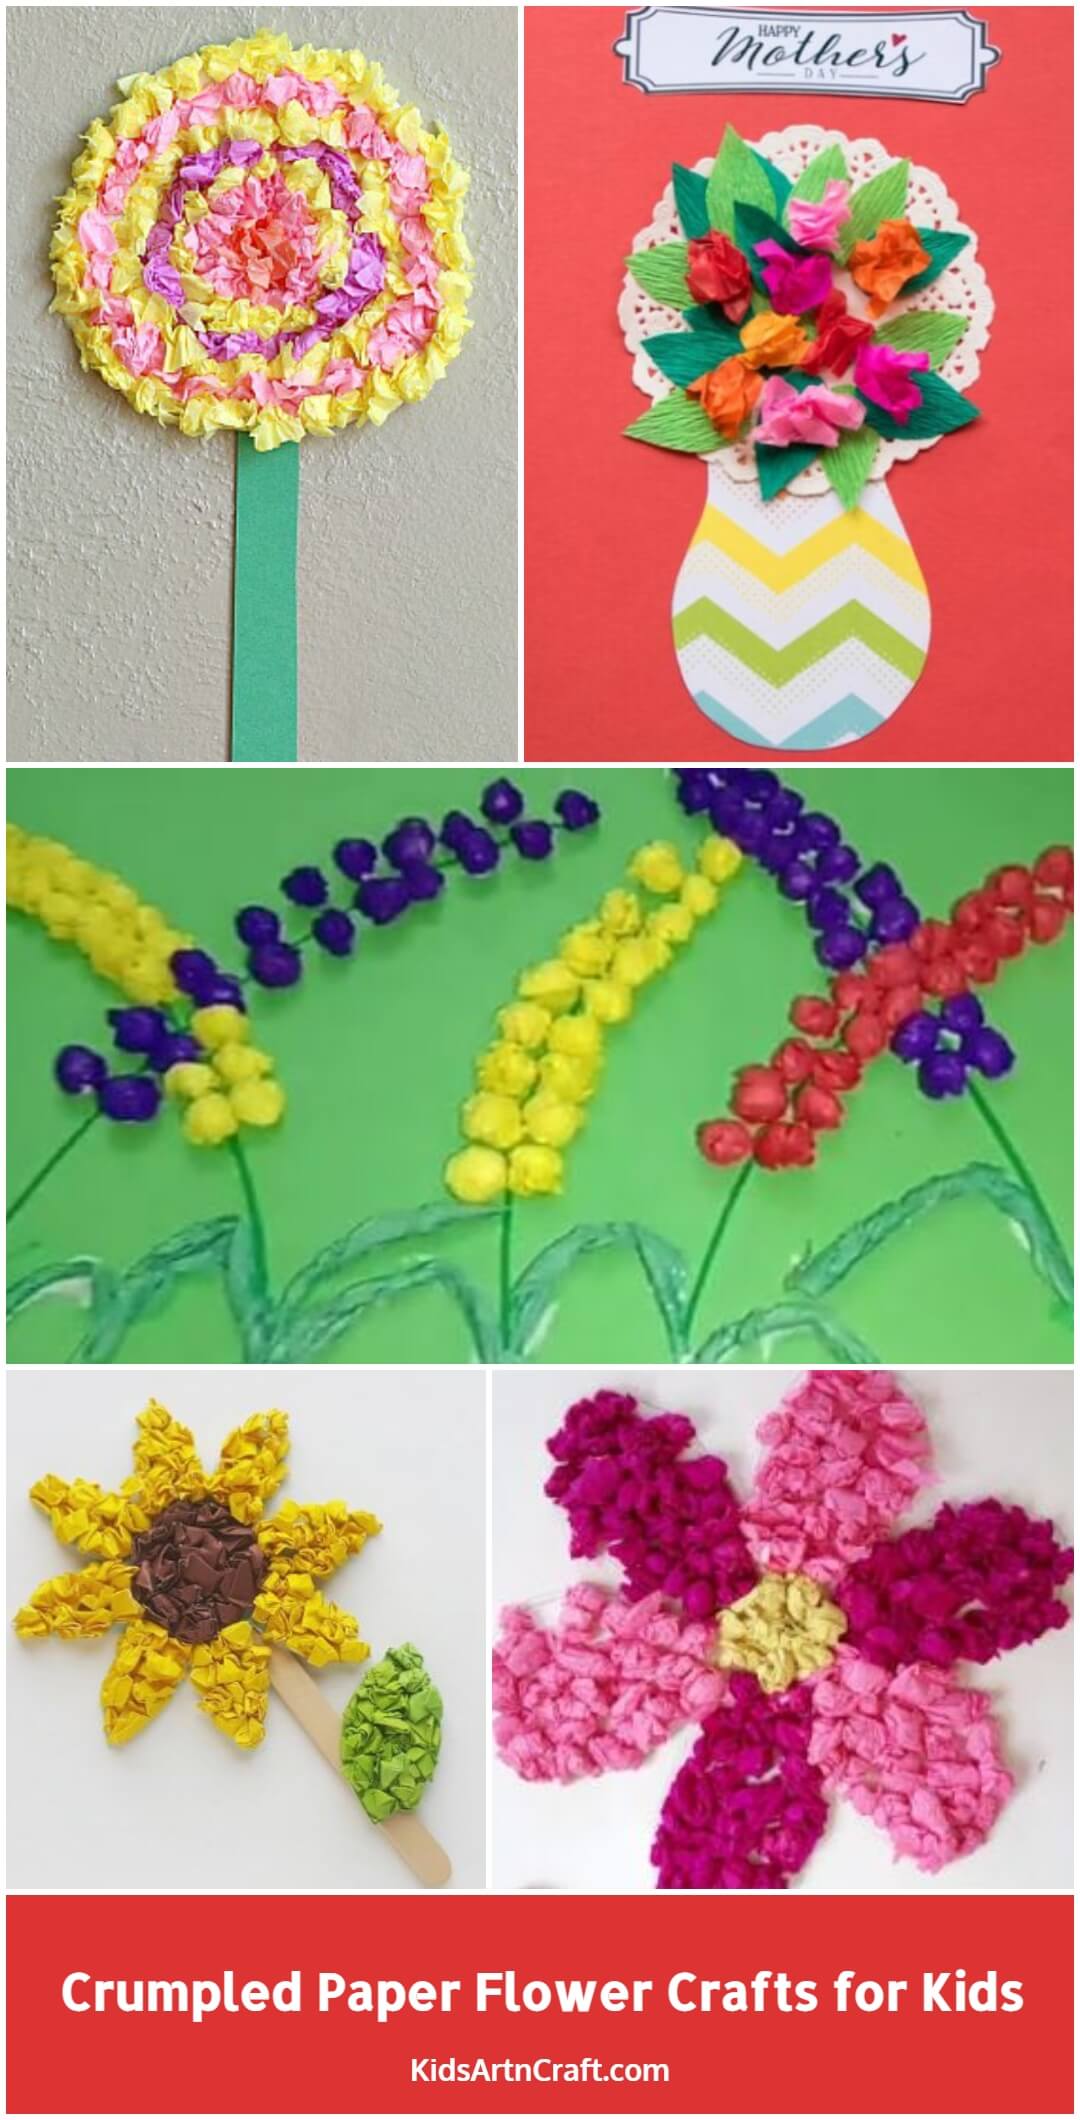 Crumpled Paper Flower Crafts for Kids